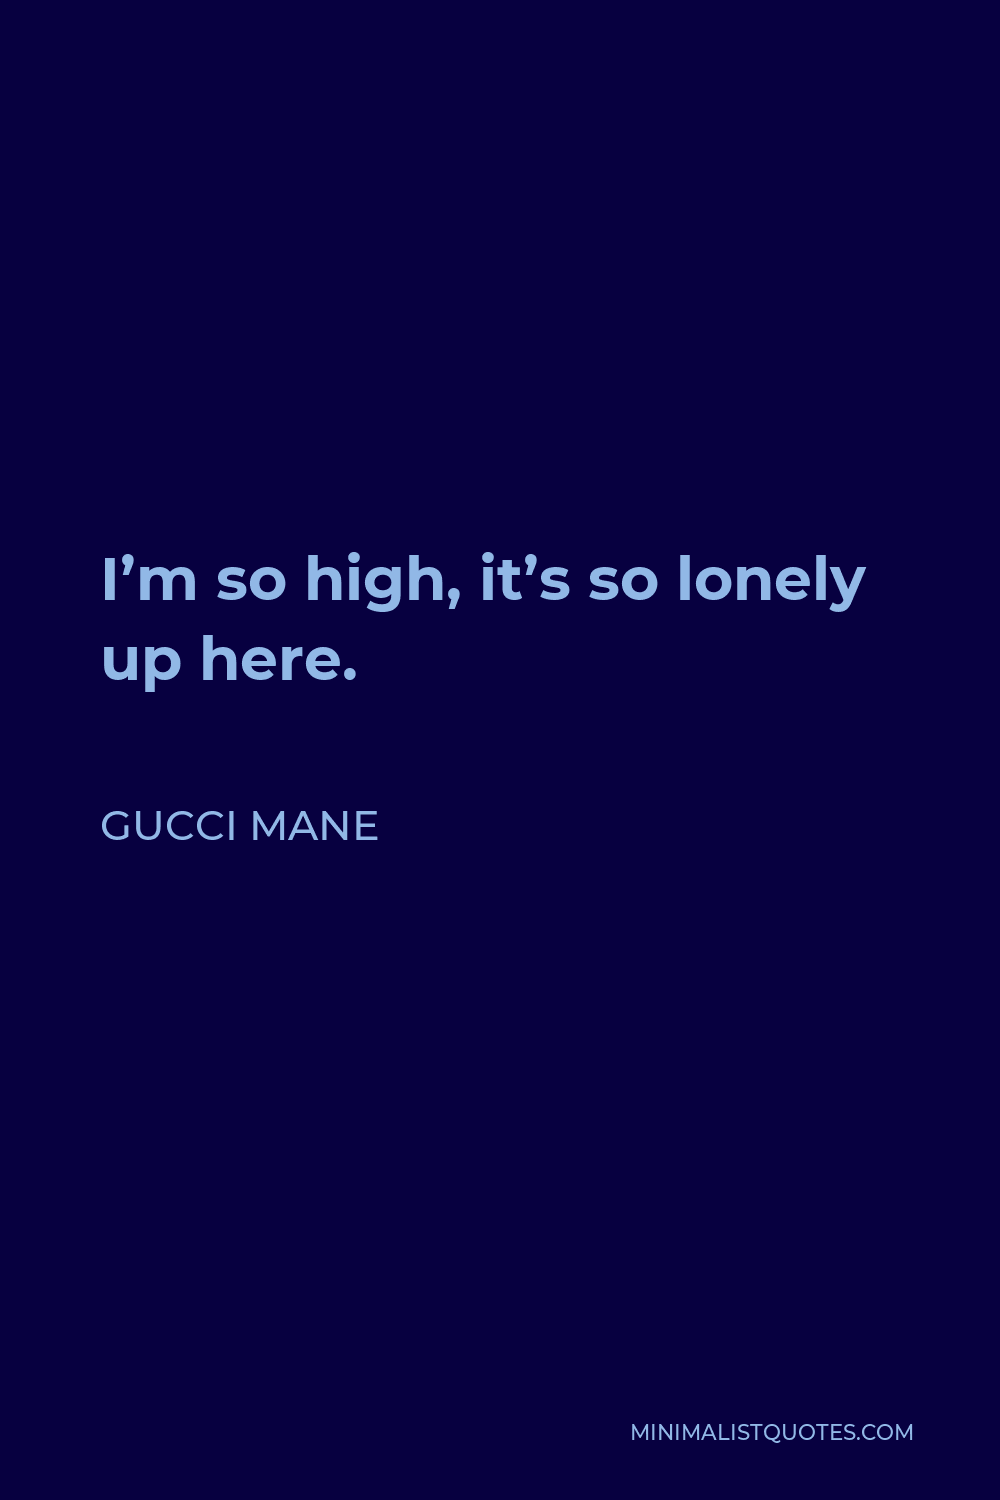 Gucci Mane Quote - I’m so high, it’s so lonely up here.